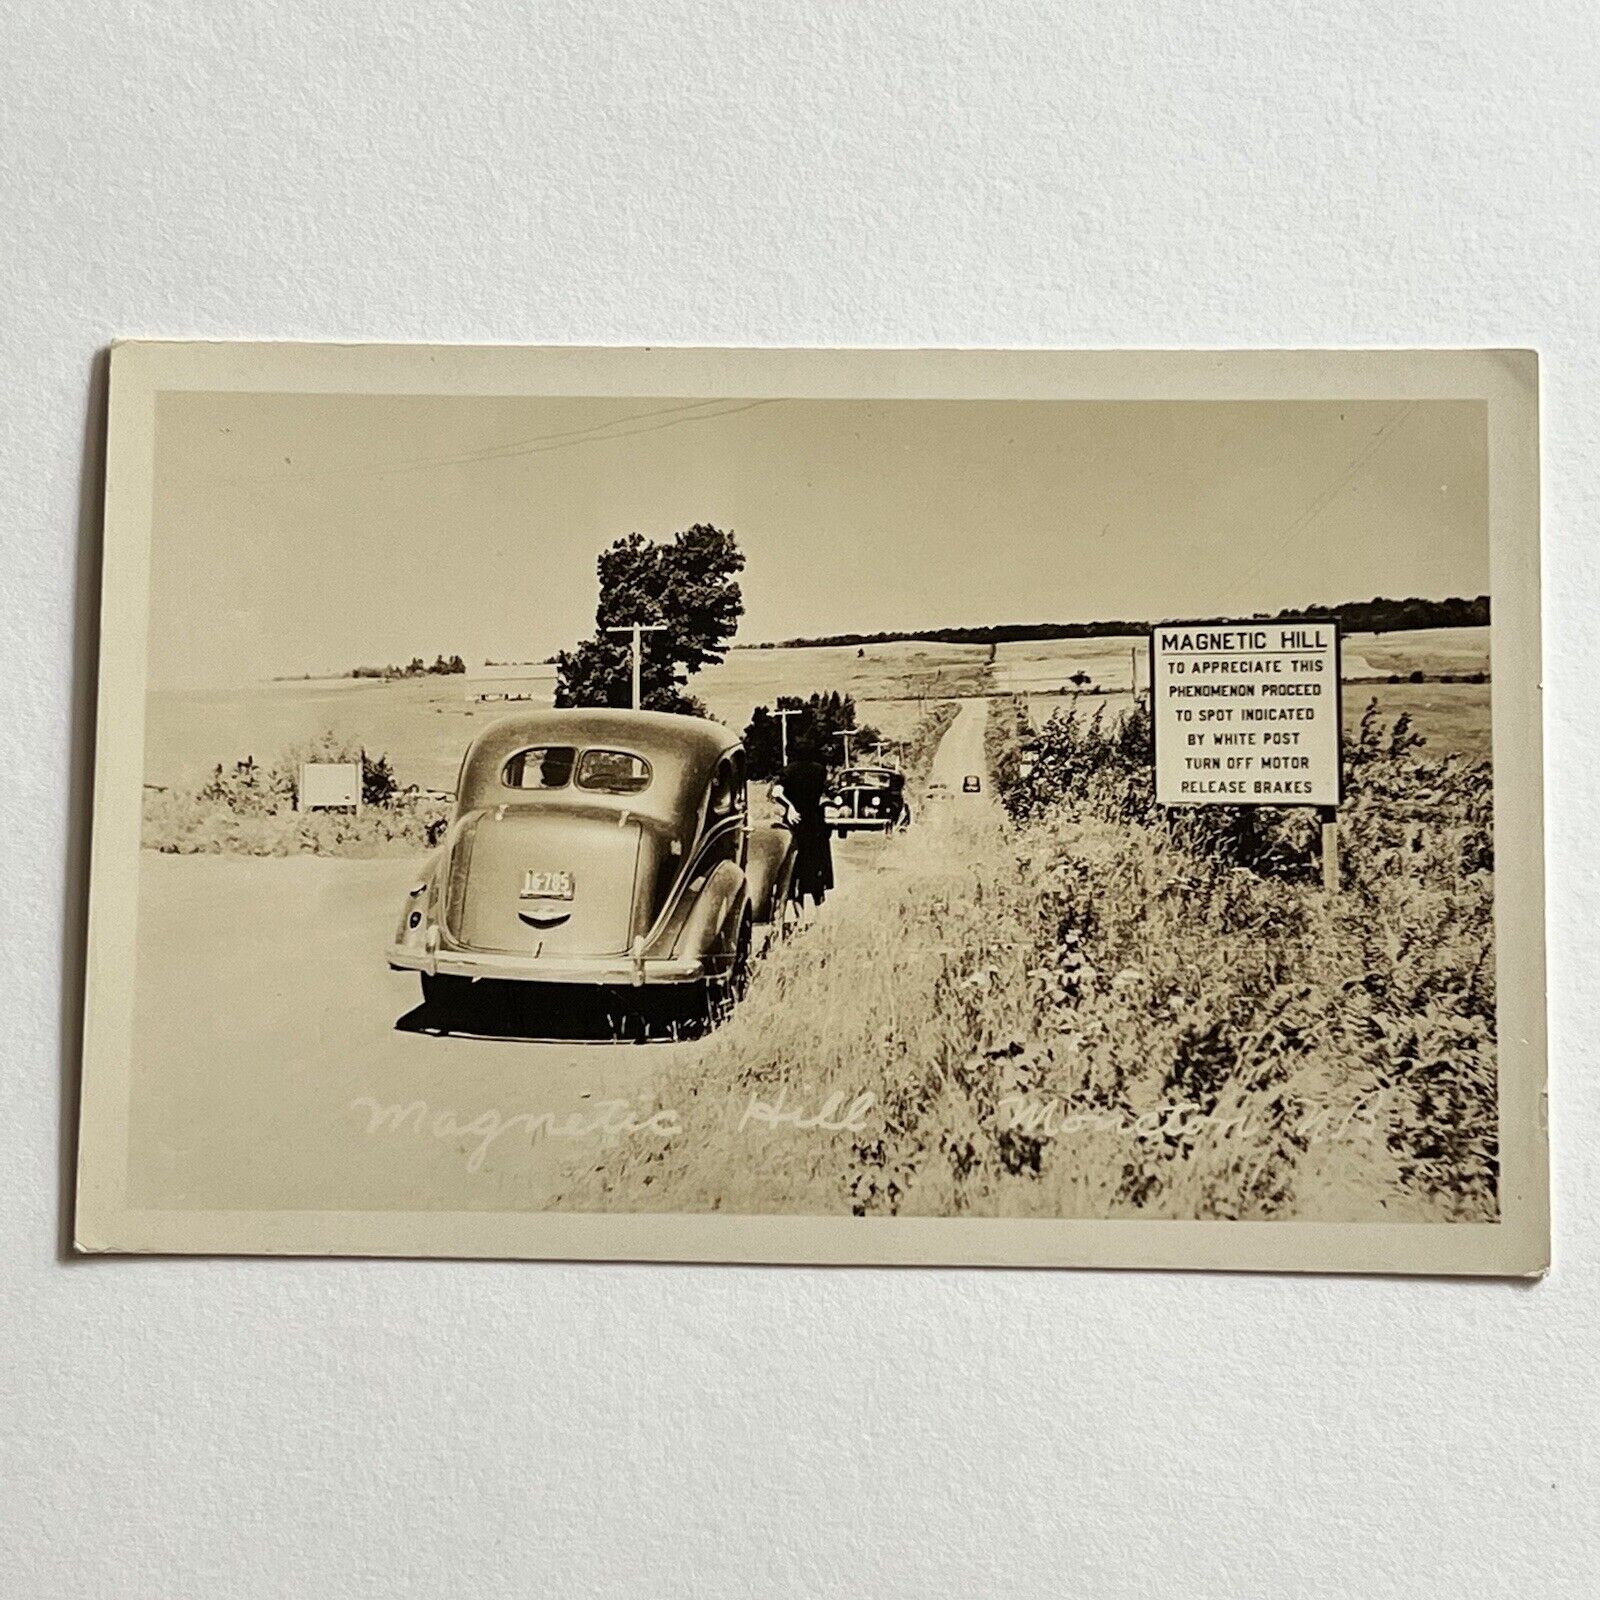 Vintage RPPC Real Photograph Postcard Magnetic Hill Car Moncton Canada NB